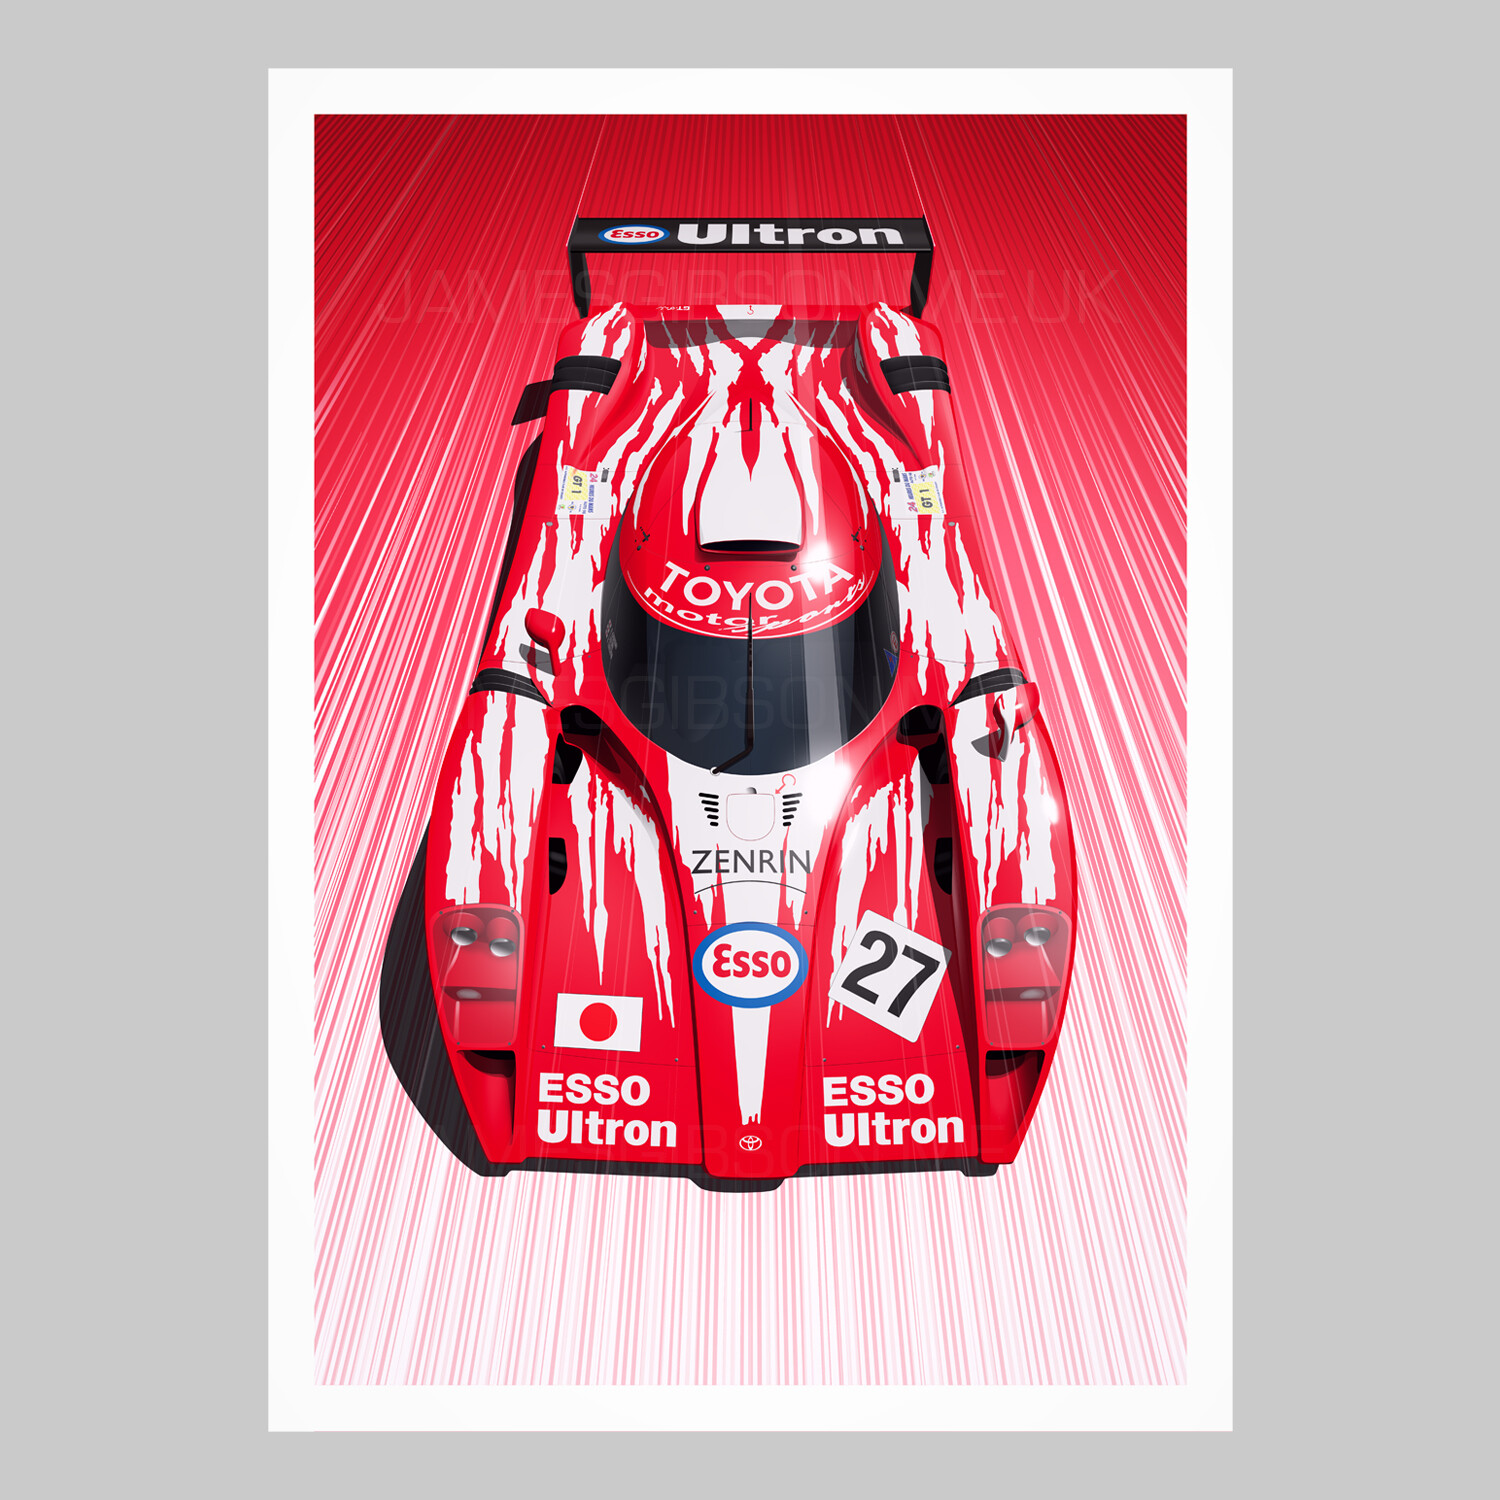 Limited Edition A2 Fine Art Print
Toyota GT-One (TS020) - Le Mans 1998